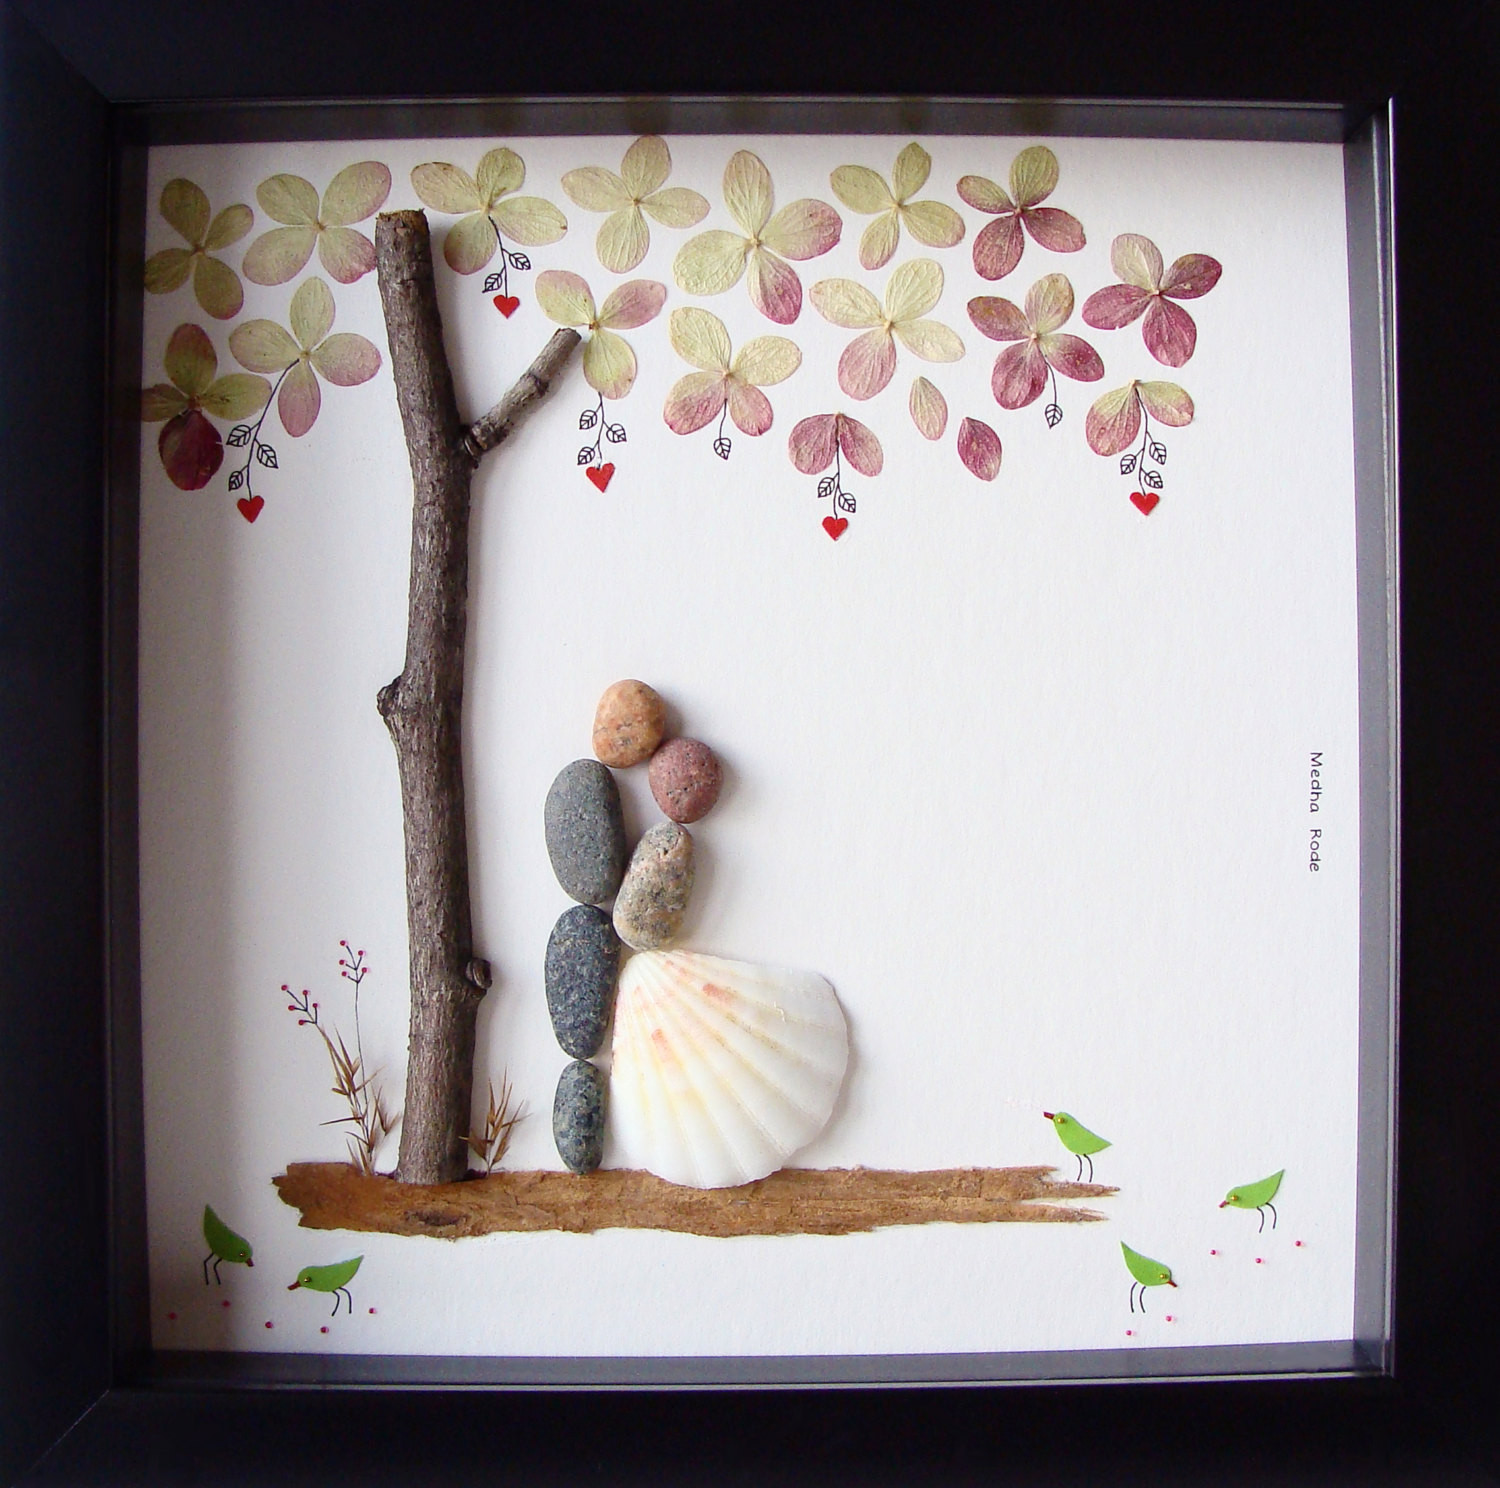 Creative Gift Ideas For Couples
 Unique Wedding Gift For Couple Wedding Pebble Art by MedhaRode